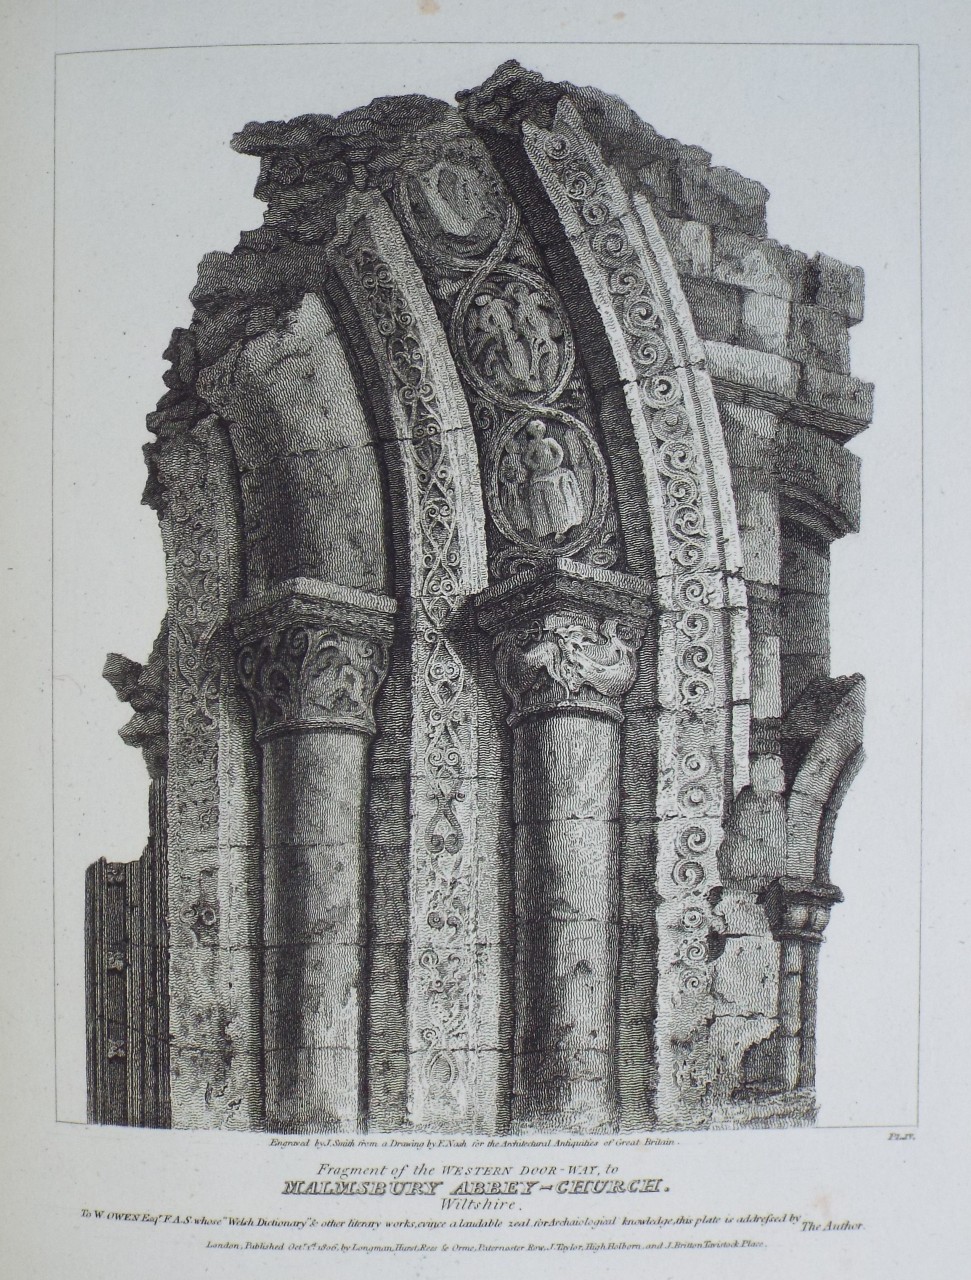 Print - Fragment of the Western Door-way, to Malmsbury Abbey-Church, Wiltshire. - Smith